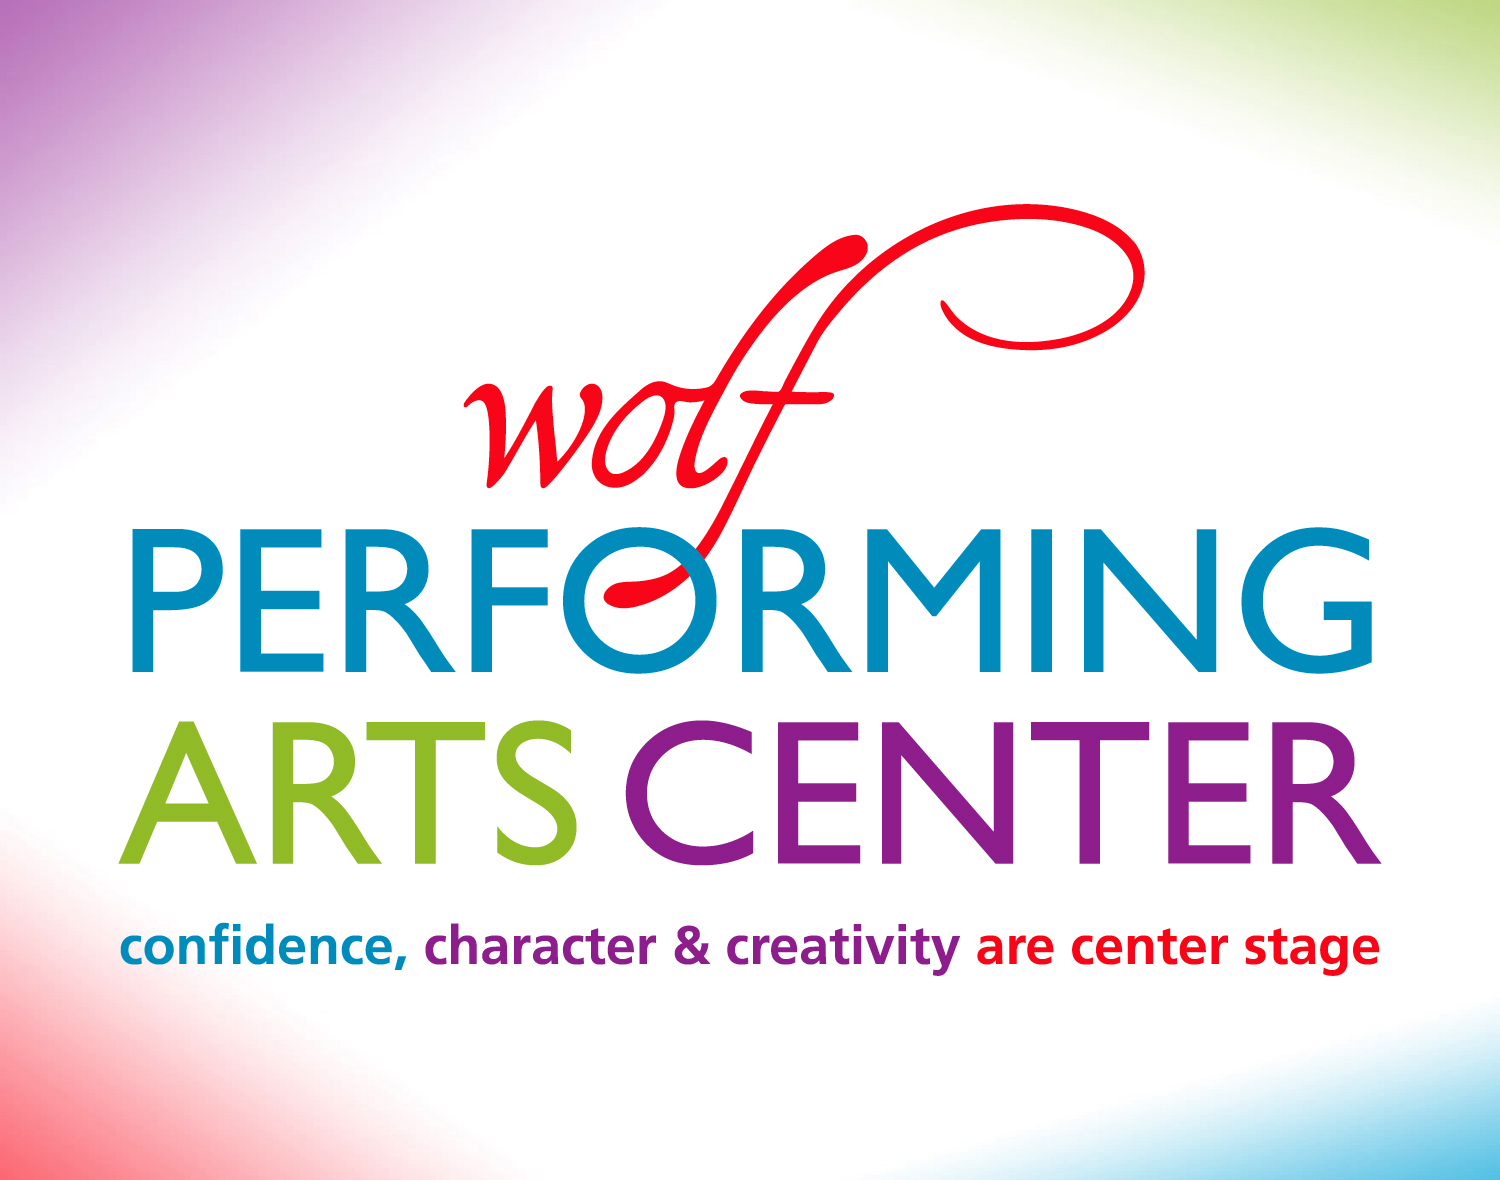 Wolf Performing Arts Center